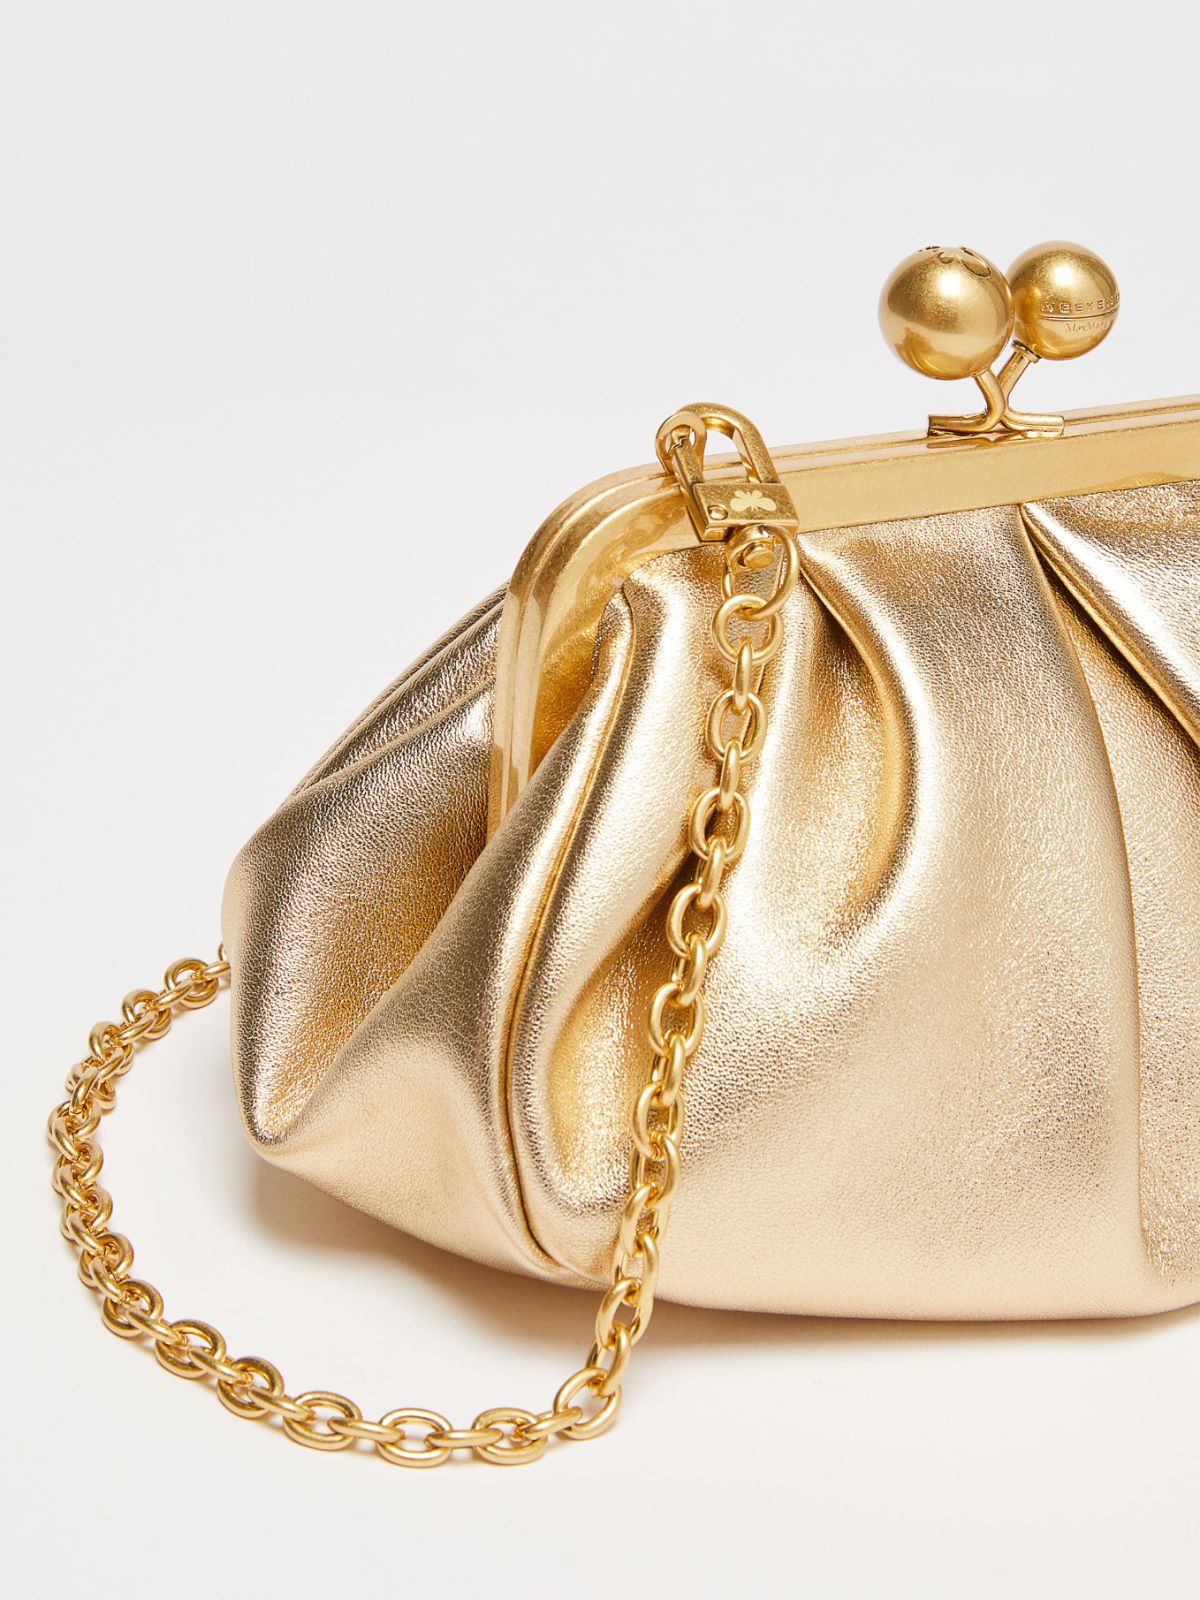 Small Pasticcino Bag in laminated nappa leather - GOLD - Weekend Max Mara - 4